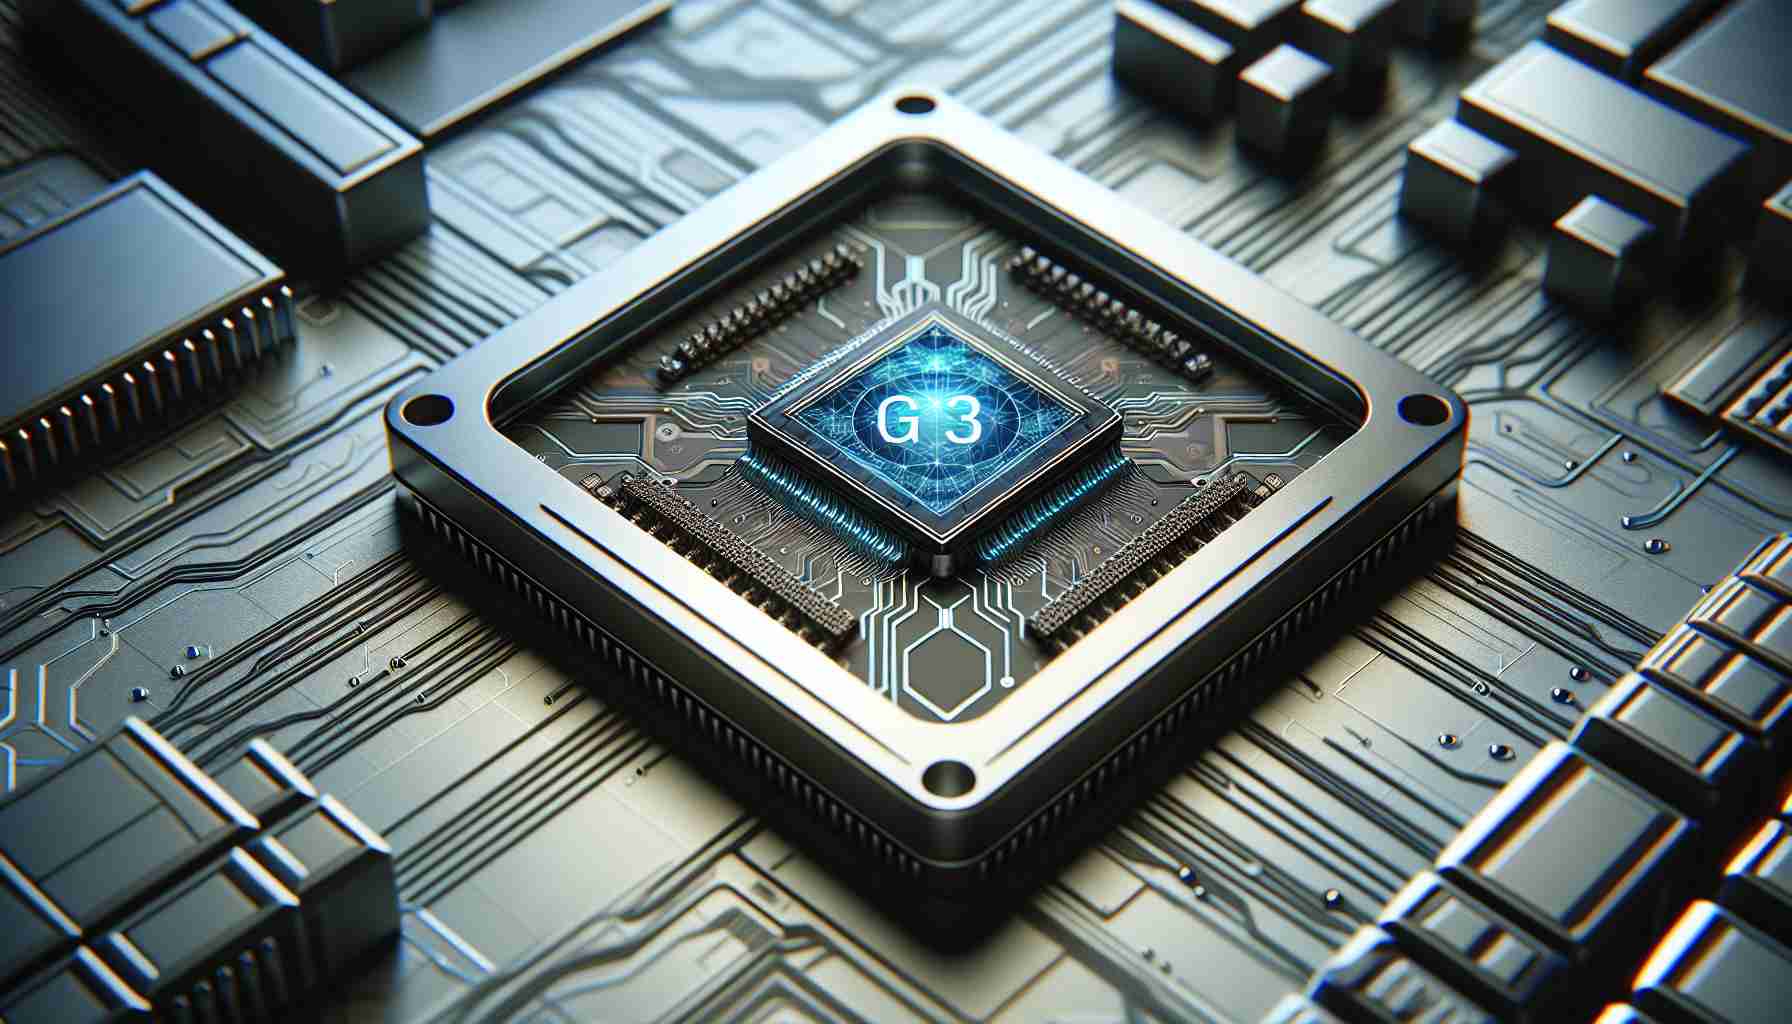 Intel Aims to Challenge Nvidia’s AI Supremacy with New Gaudi 3 Chip